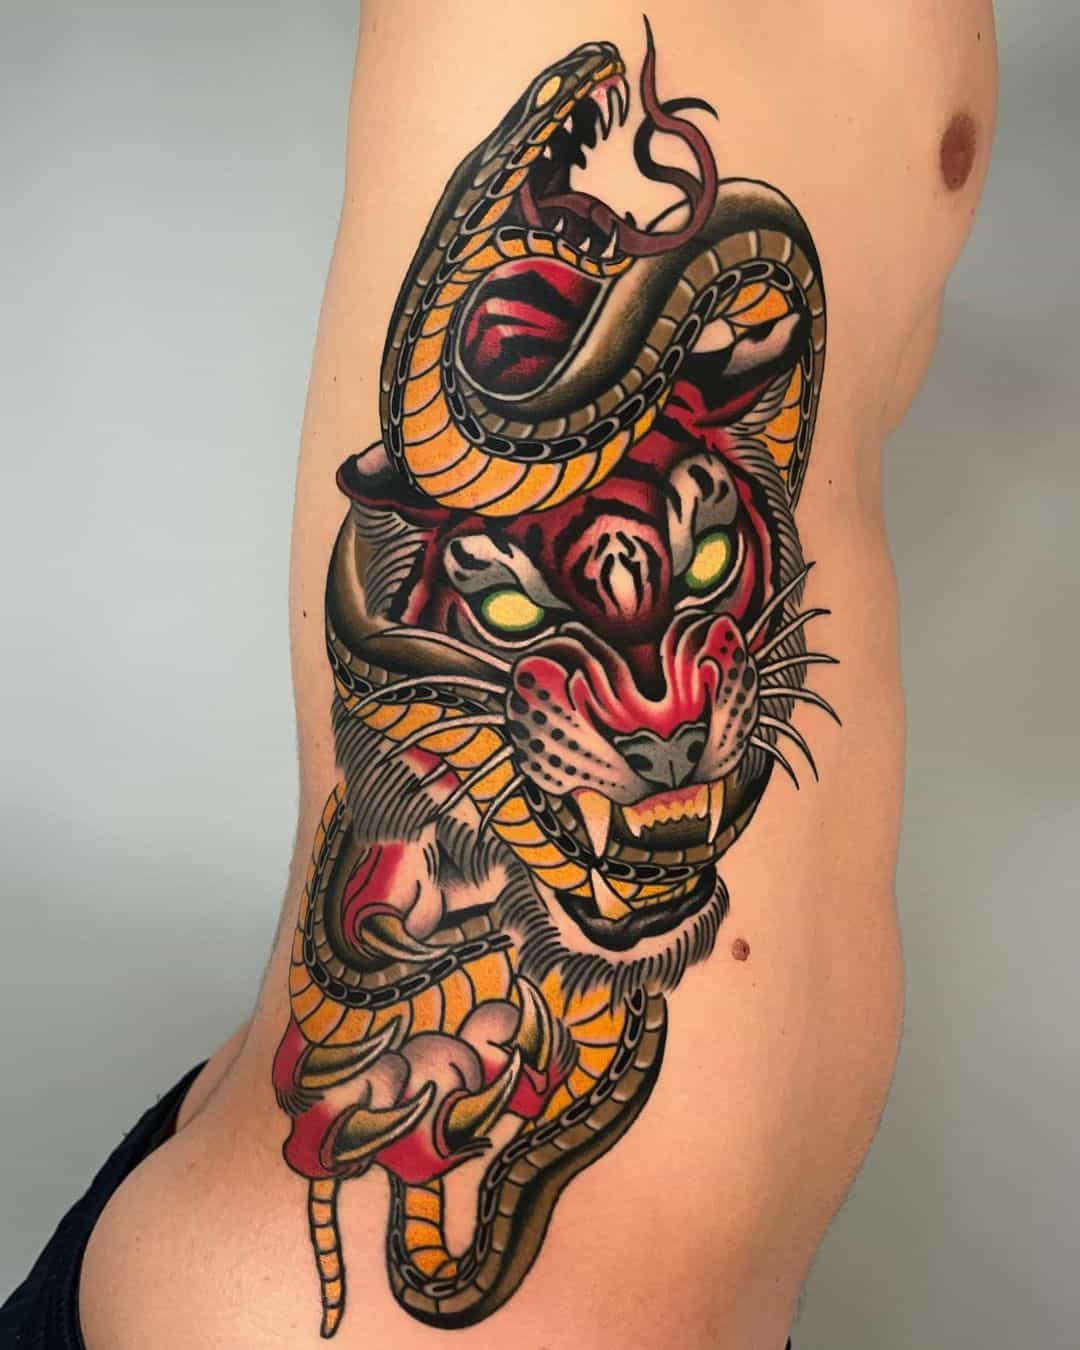 Amazing tiger with snake tattoo by ill mace